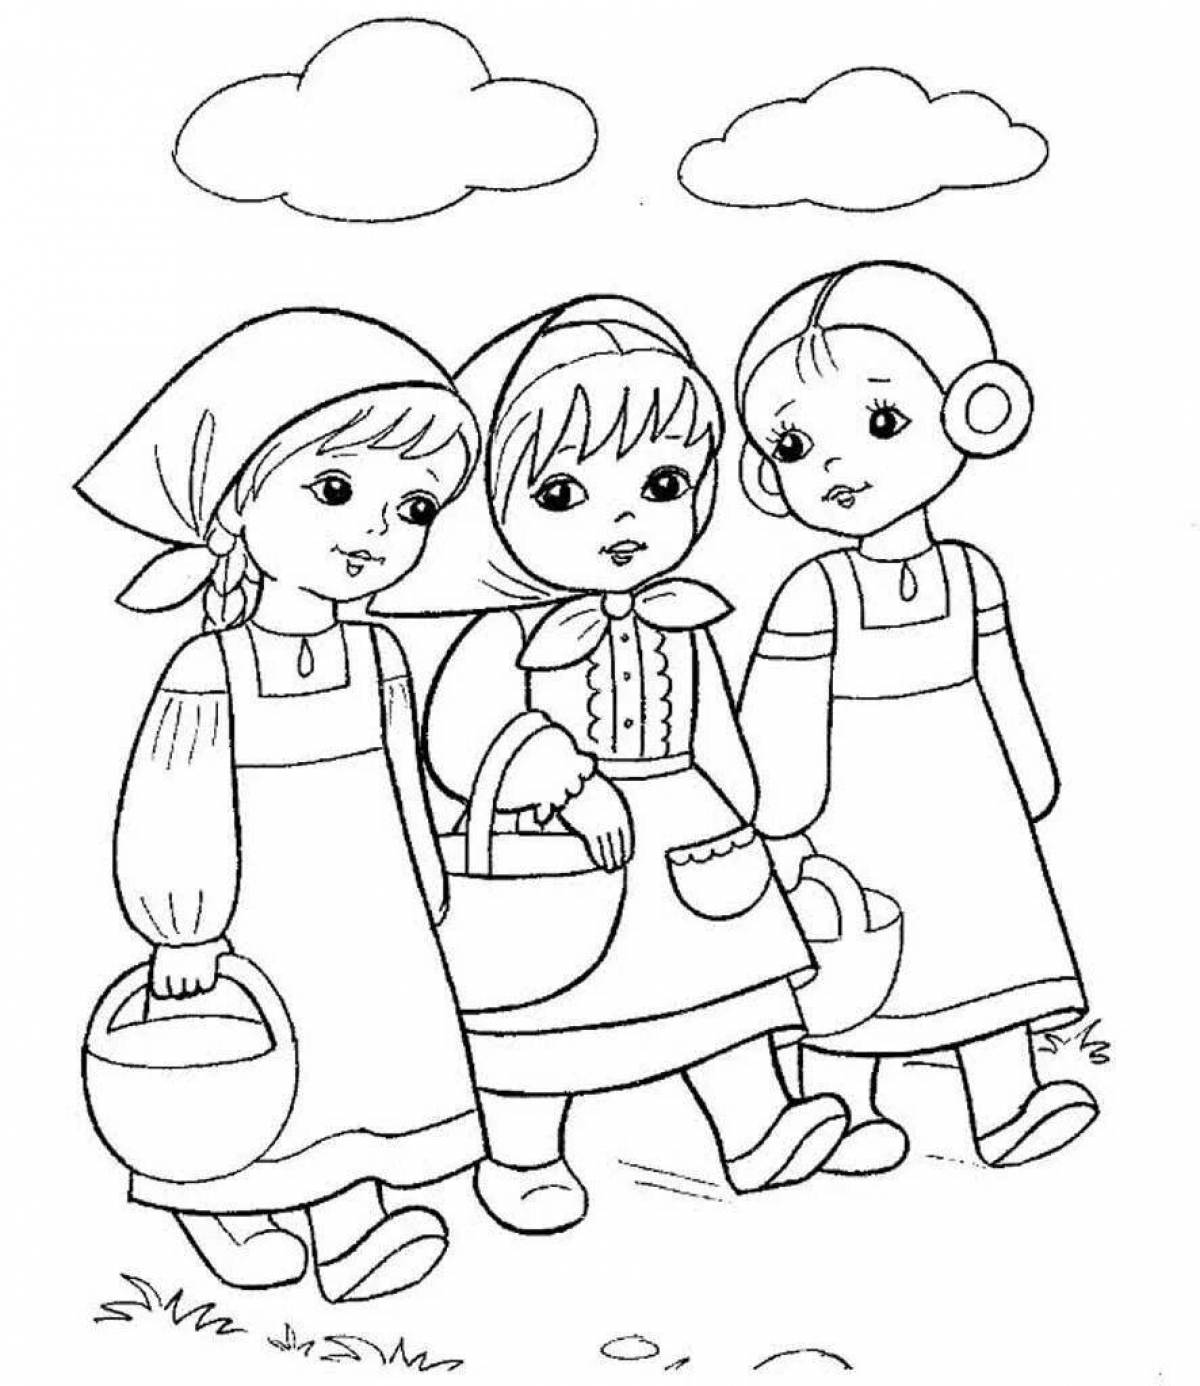 Living story coloring page